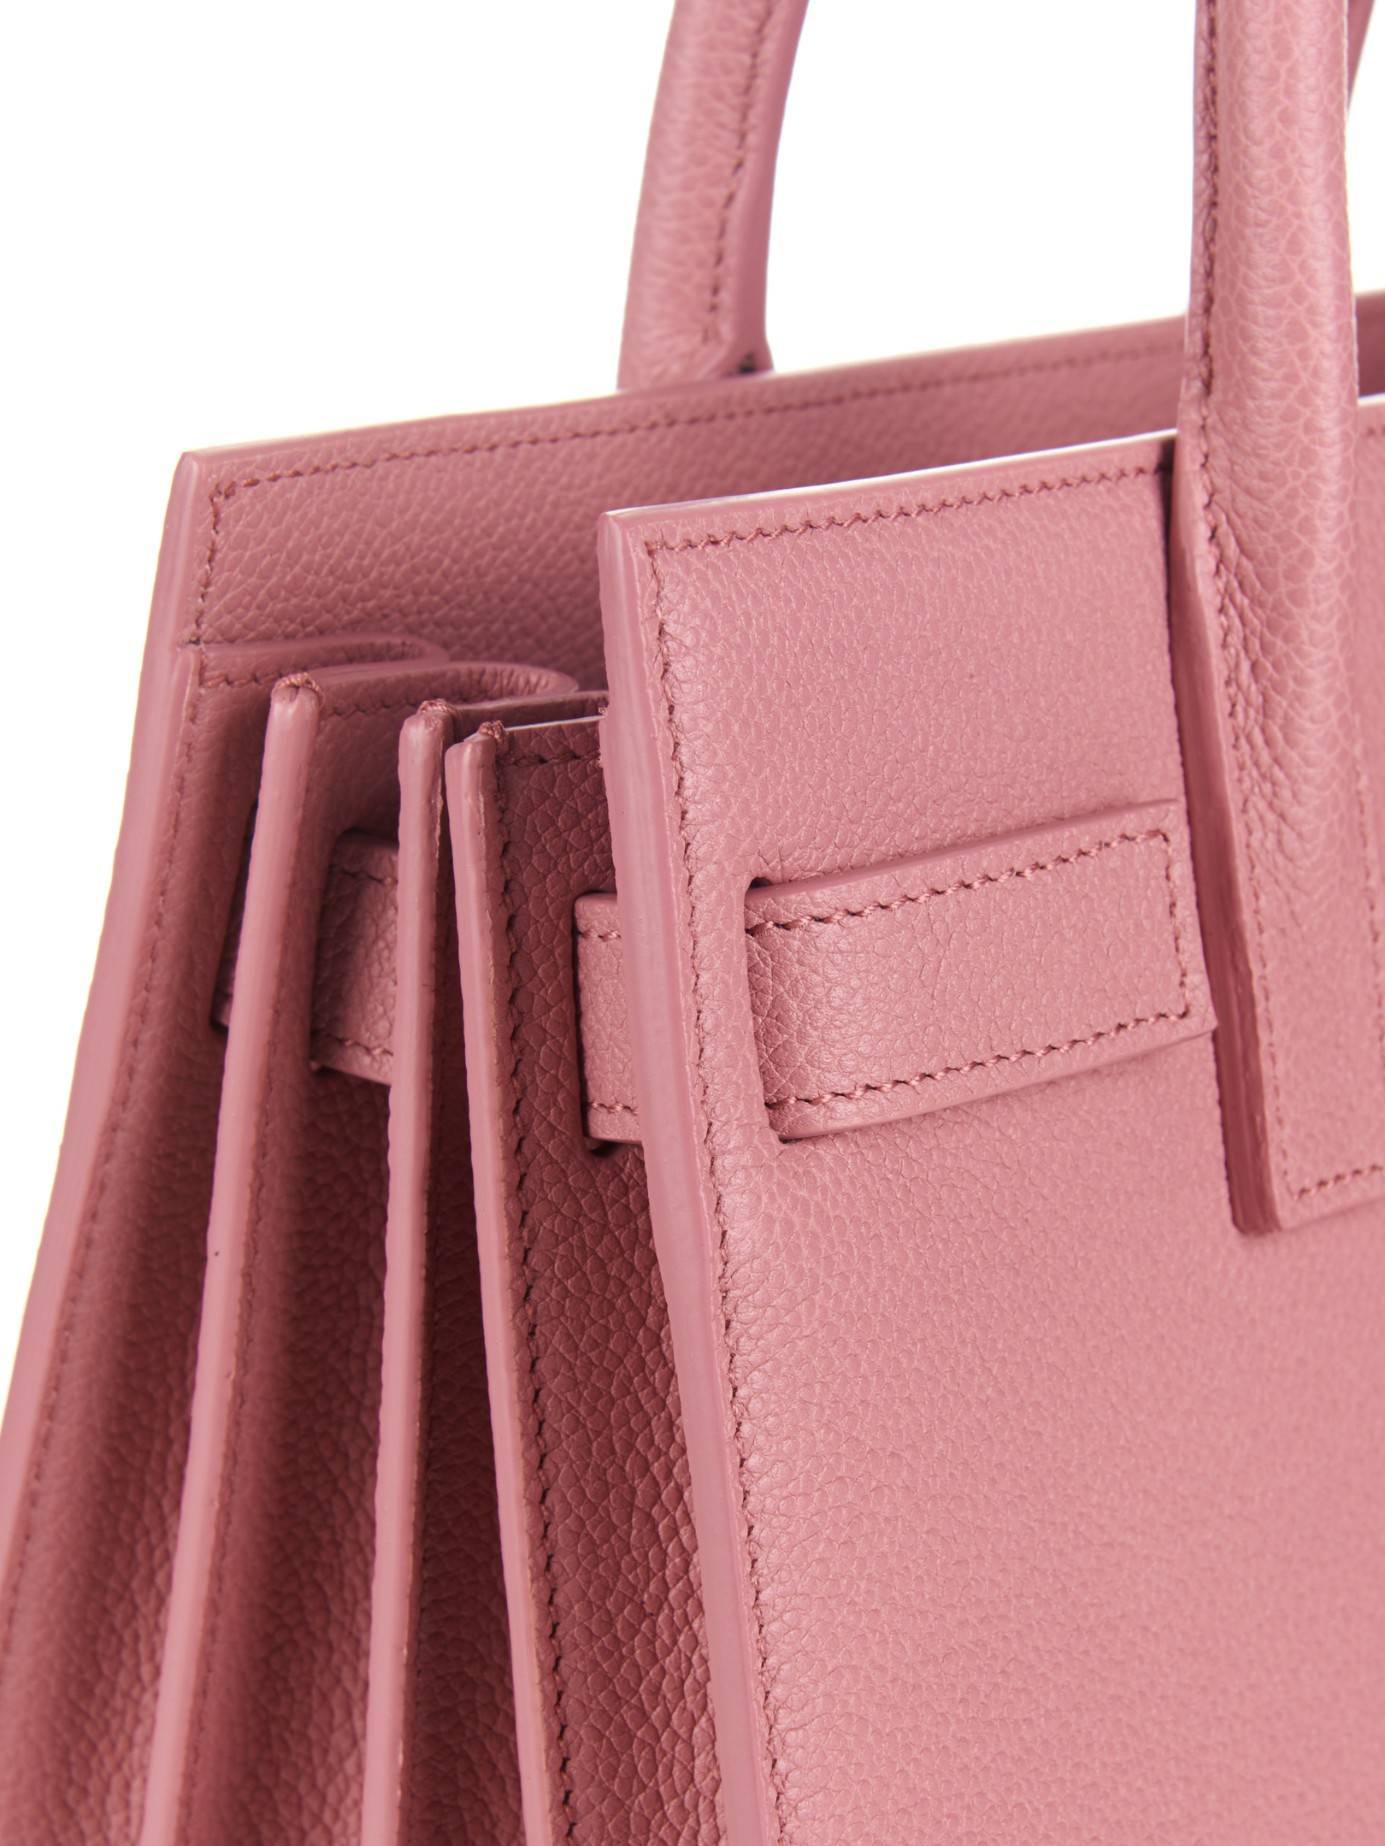 ysl mini cabas chyc price - classic small sac de jour bag in light rose grained leather